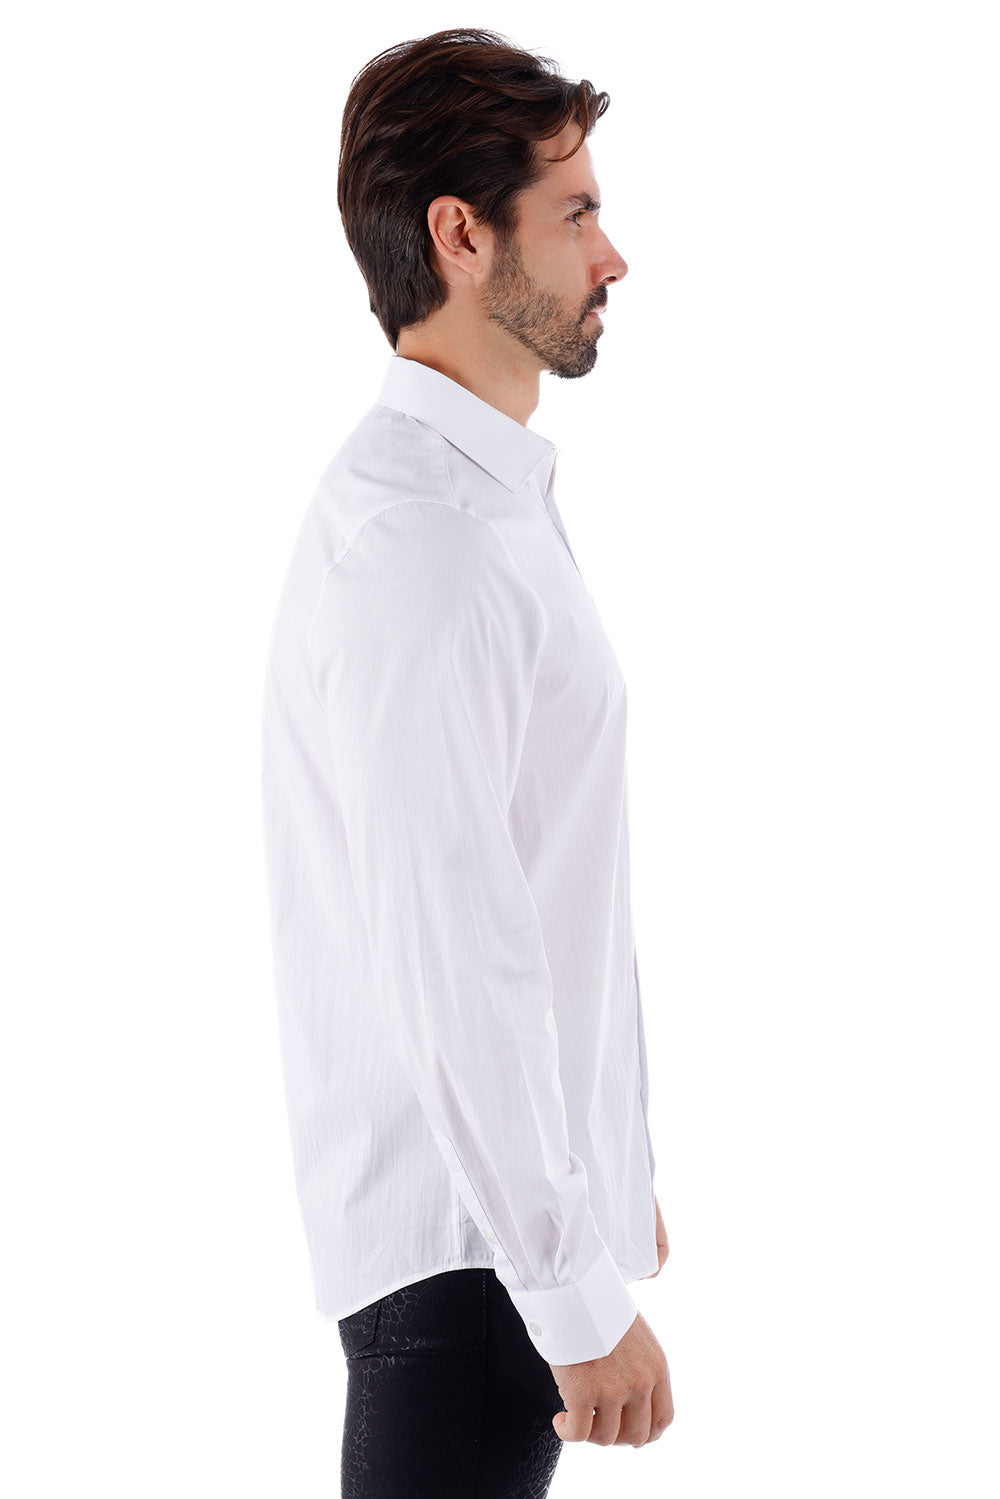 BARABAS Men's Solid Color Button Down Long Sleeve Shirt 4B410 White